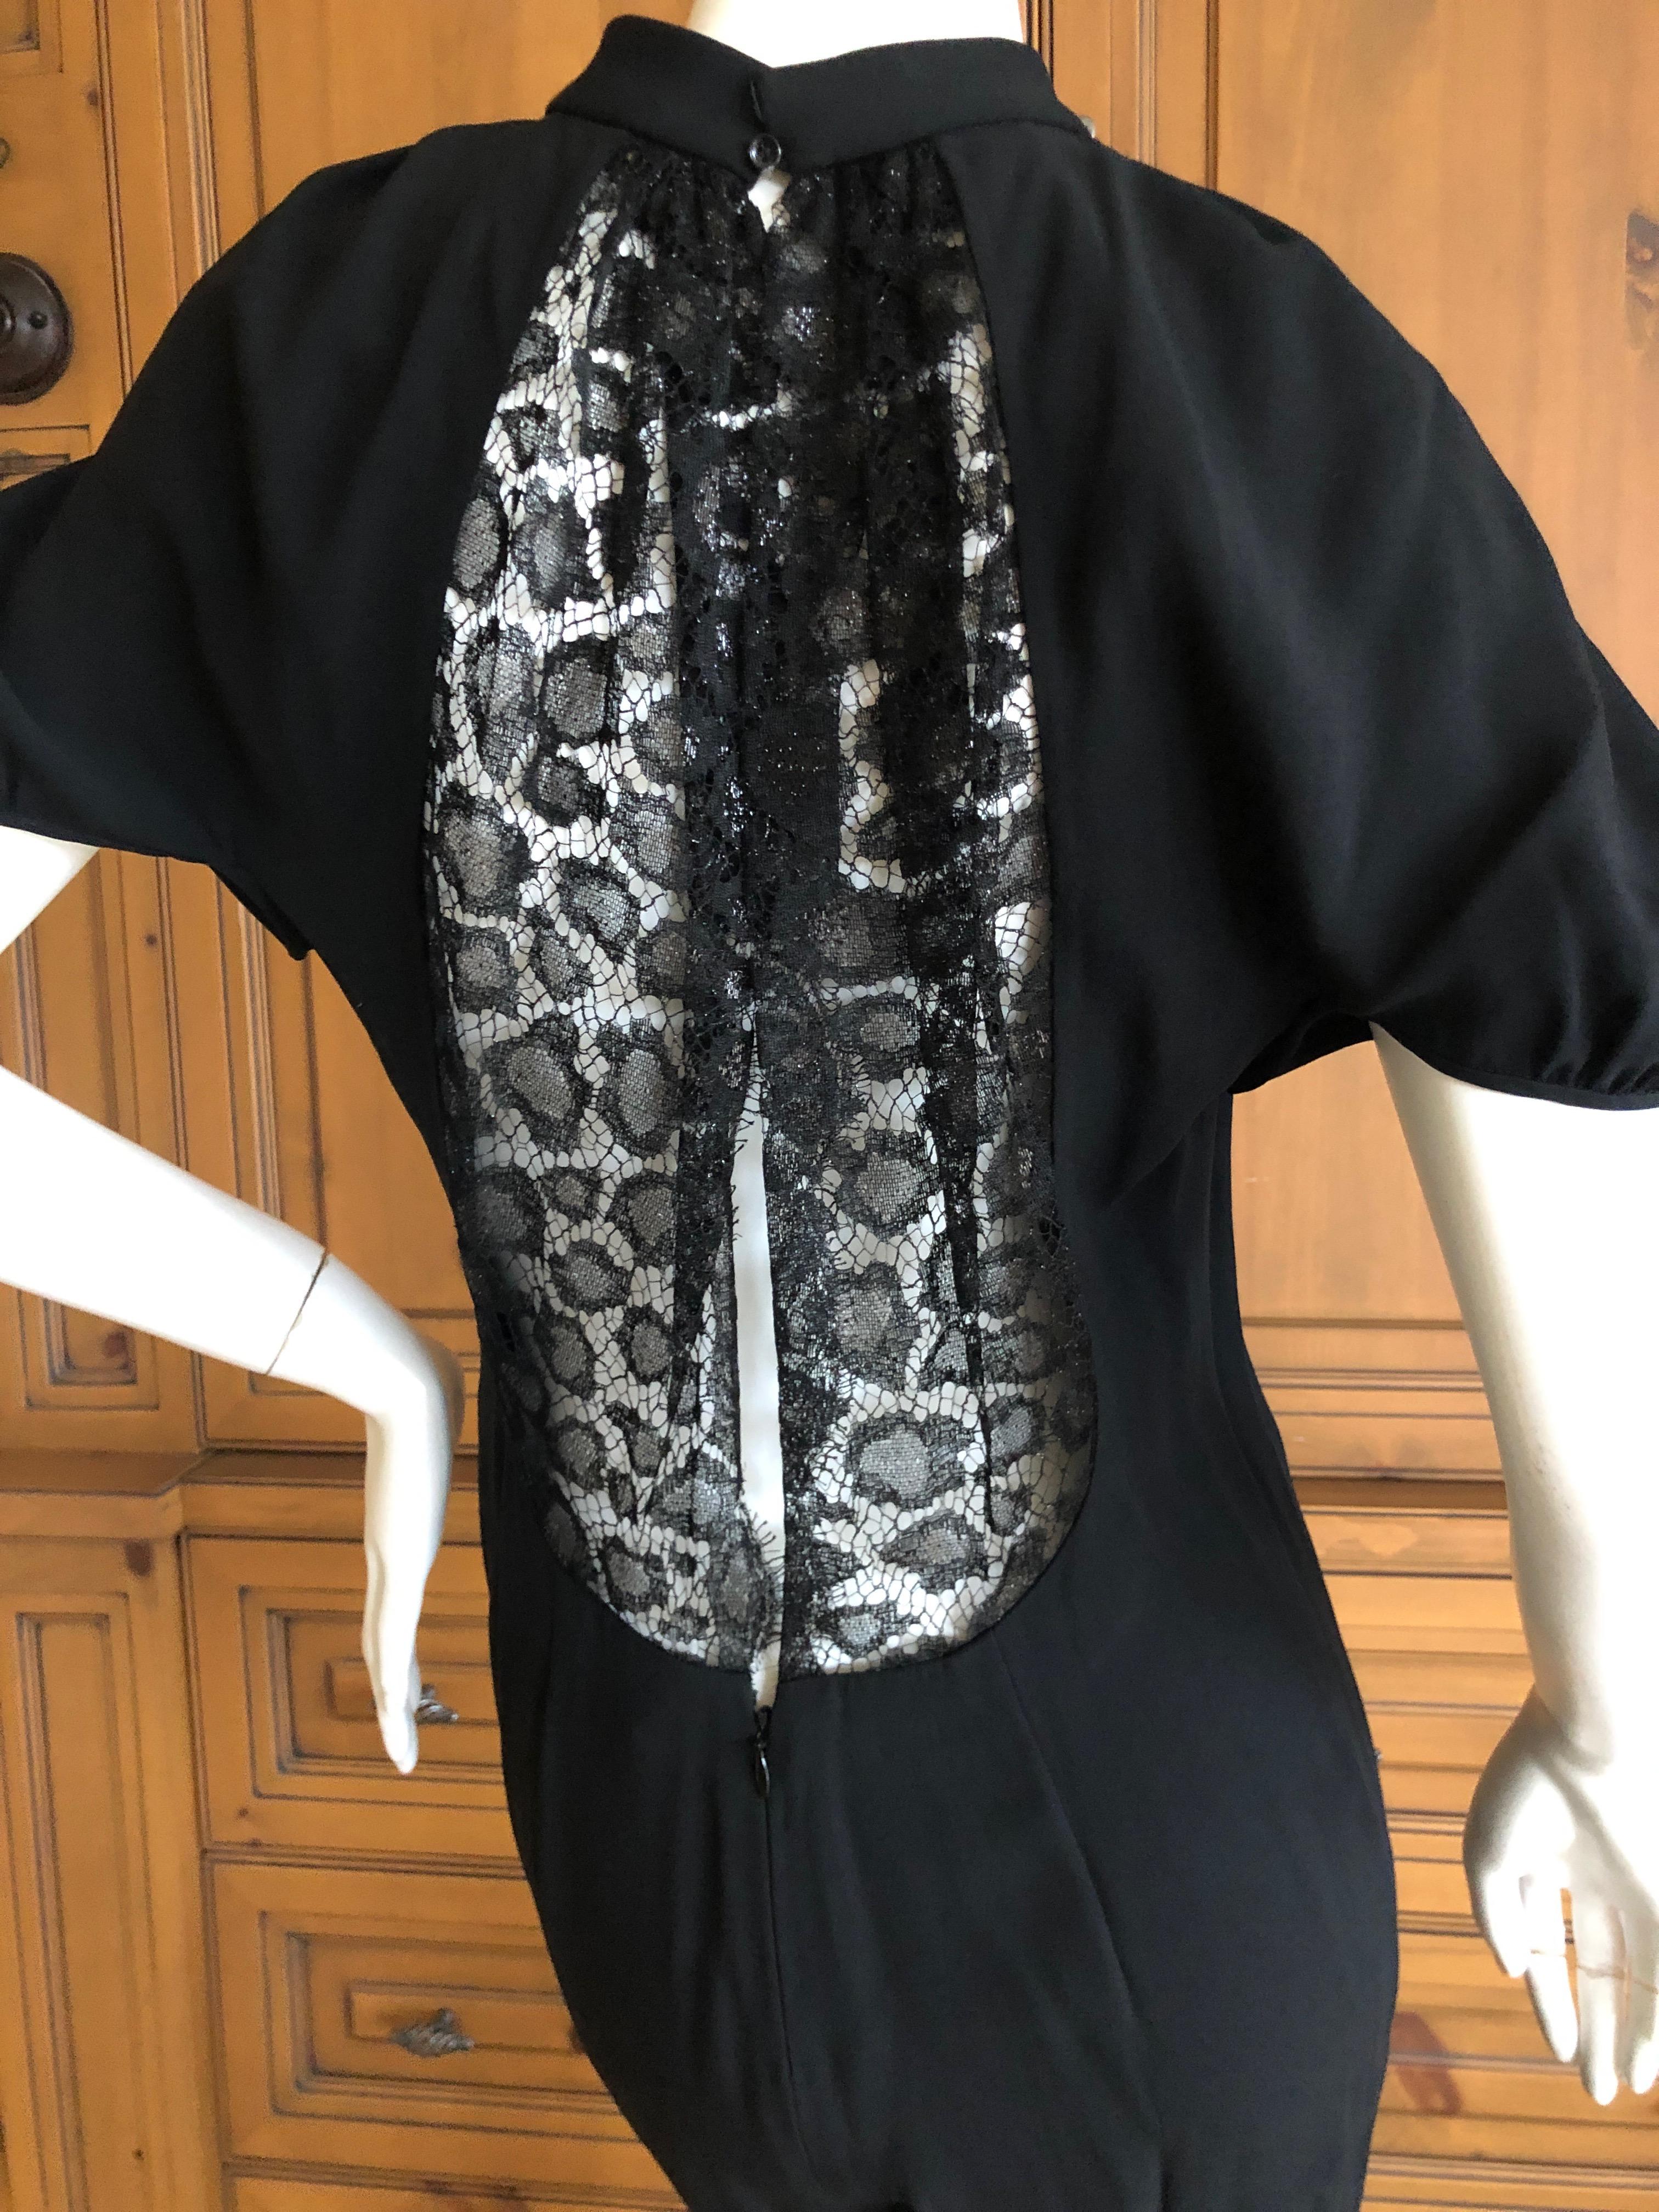 Yves Saint Laurent by Tom Ford Black Jumpsuit with Sheer Black Lace Back.
The pants are pencil thin.
Size 38 French
Bust 36